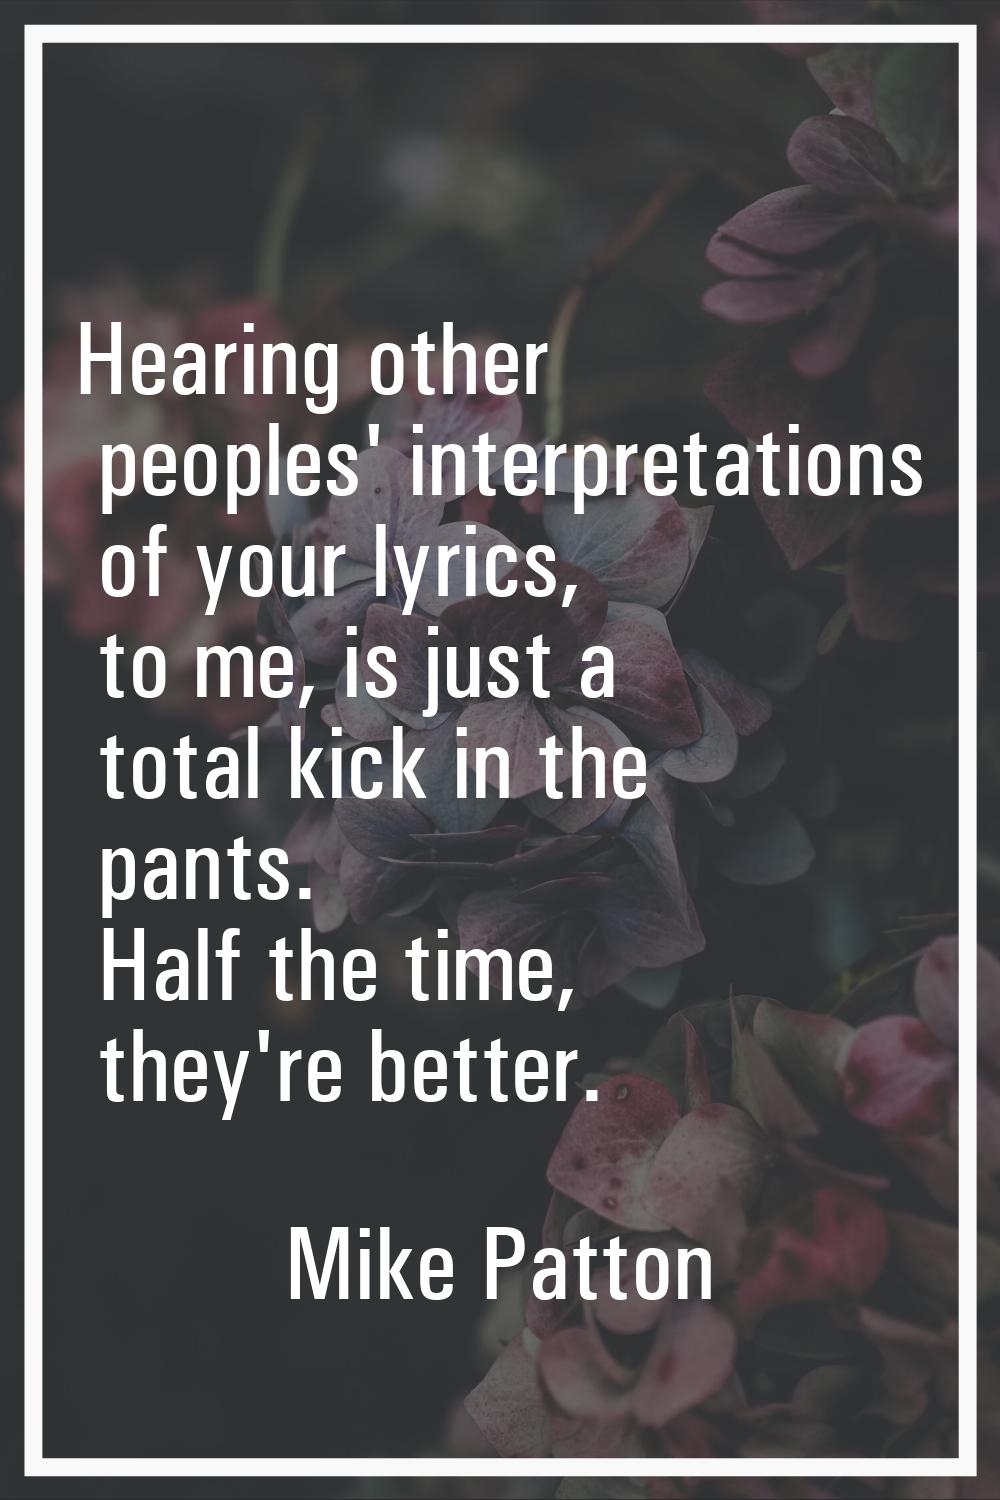 Hearing other peoples' interpretations of your lyrics, to me, is just a total kick in the pants. Ha